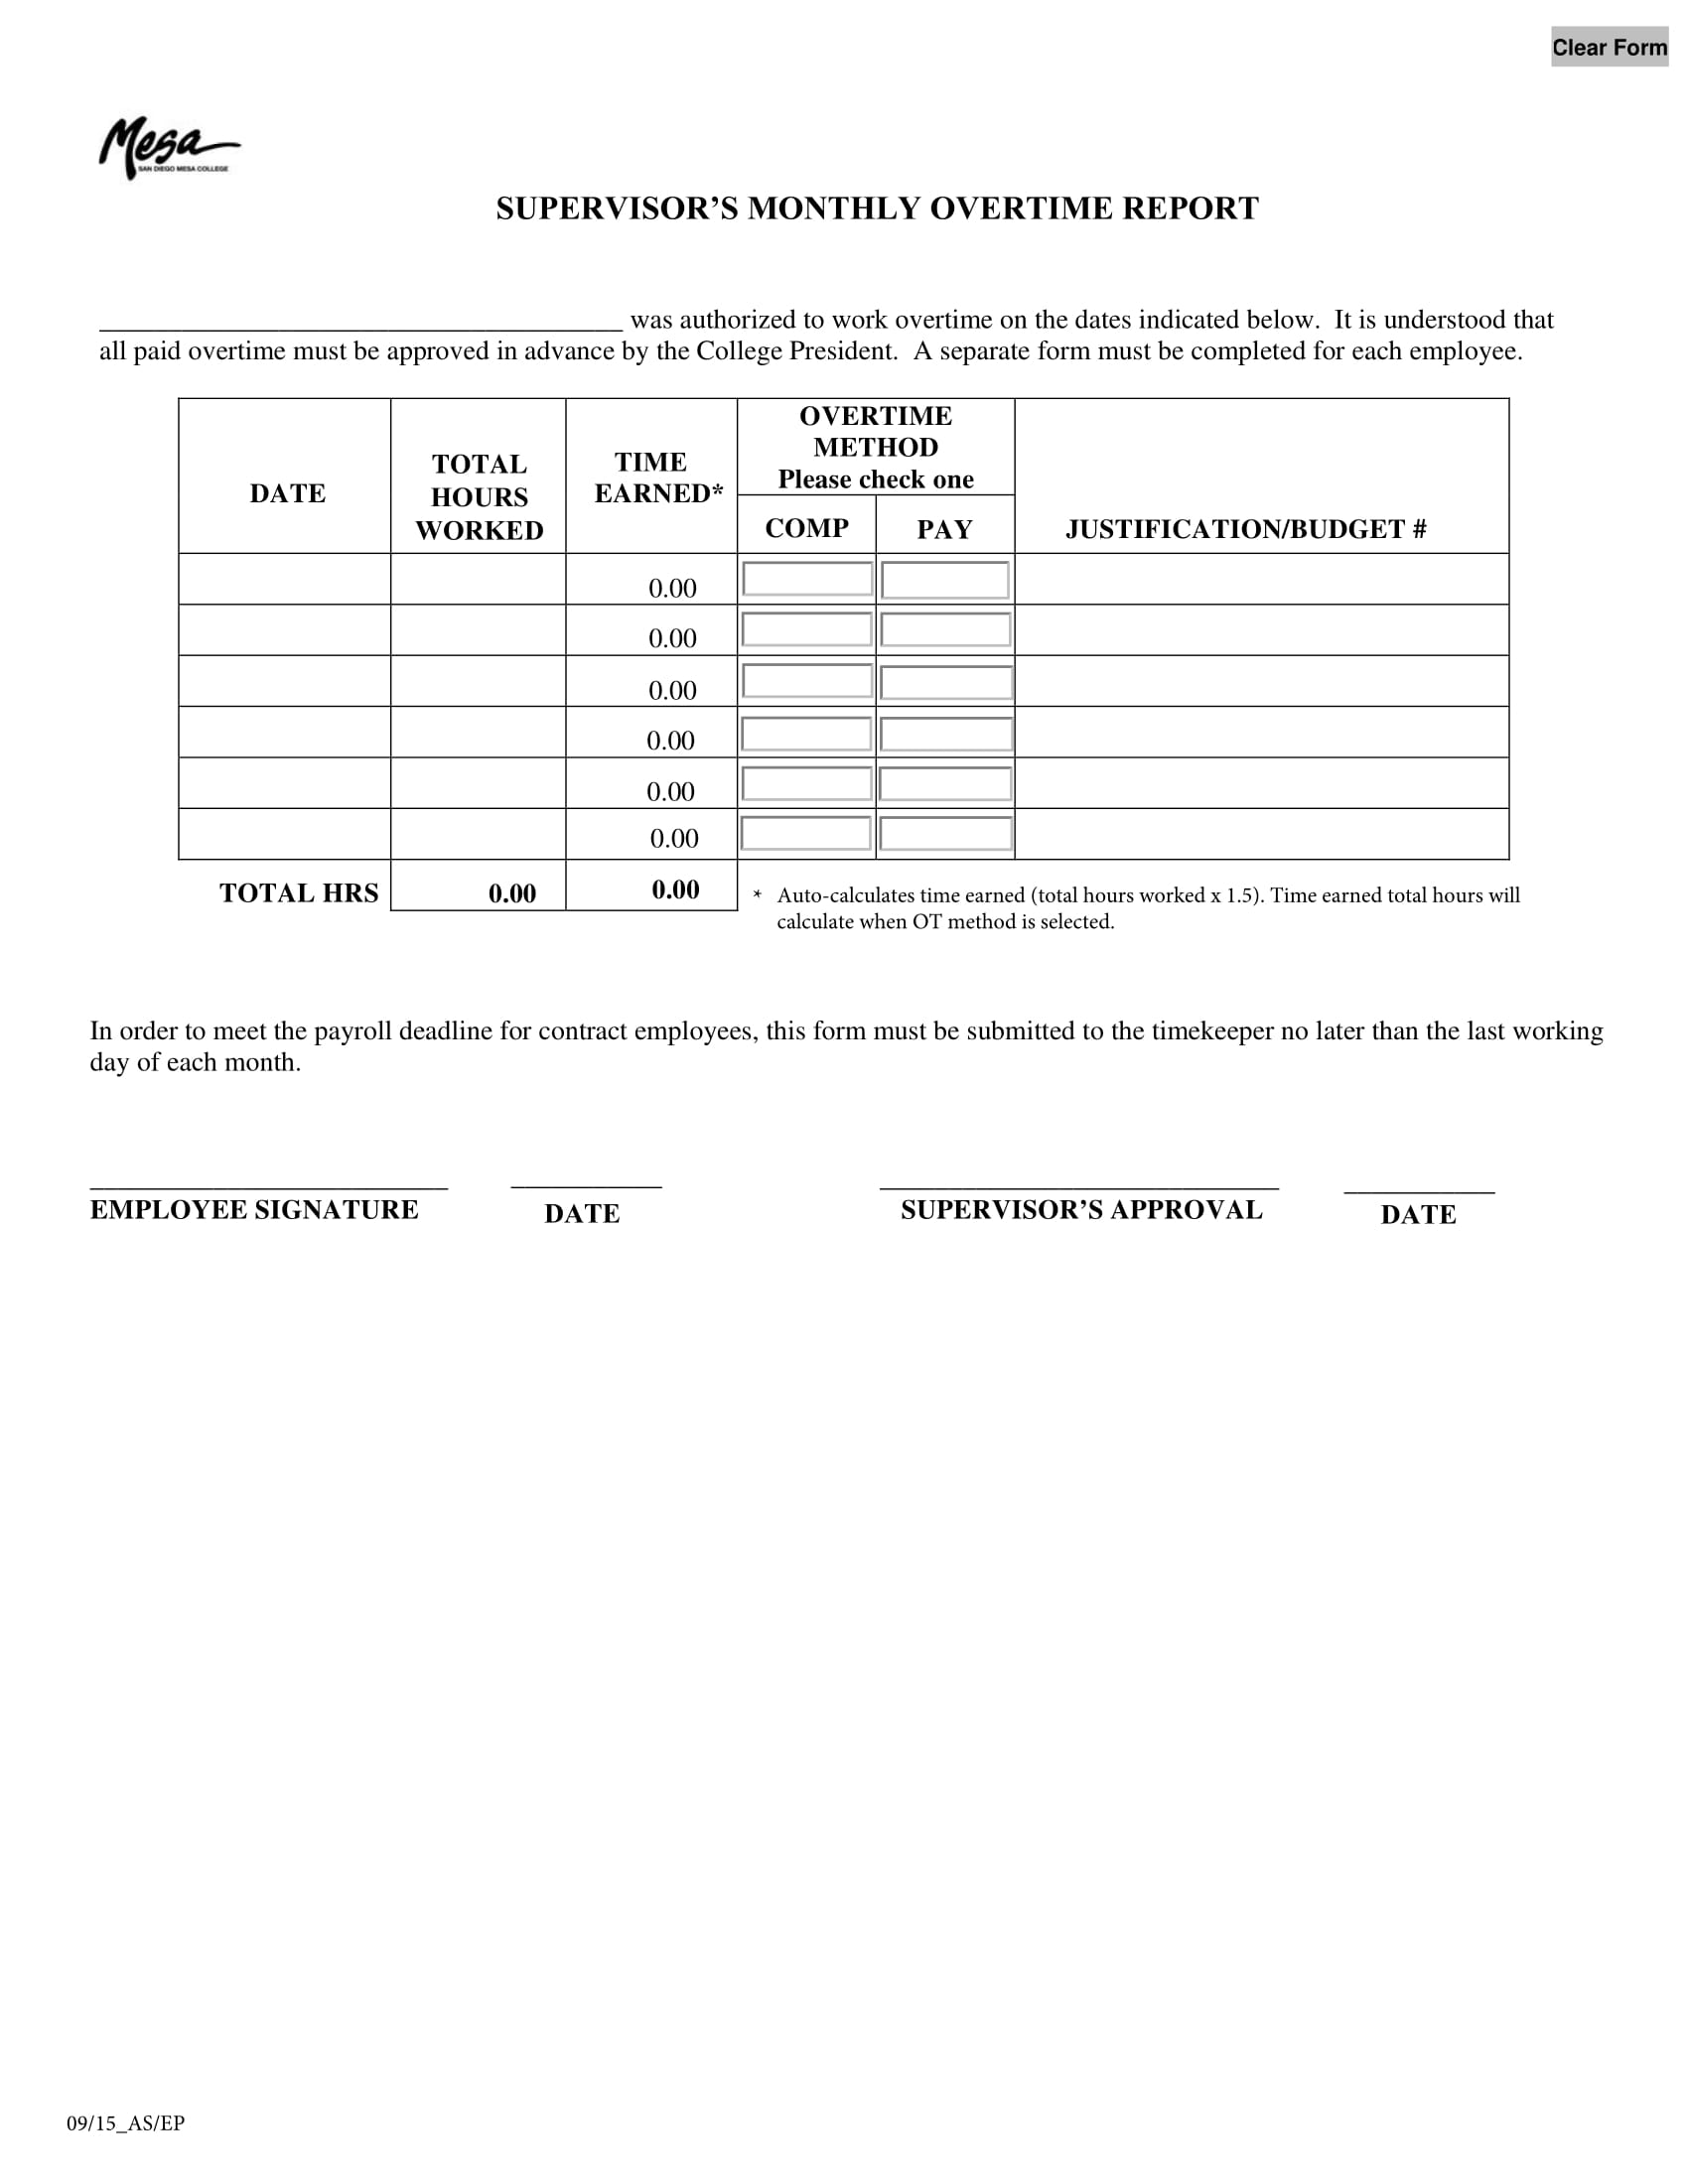 supervisors monthly overtime report example